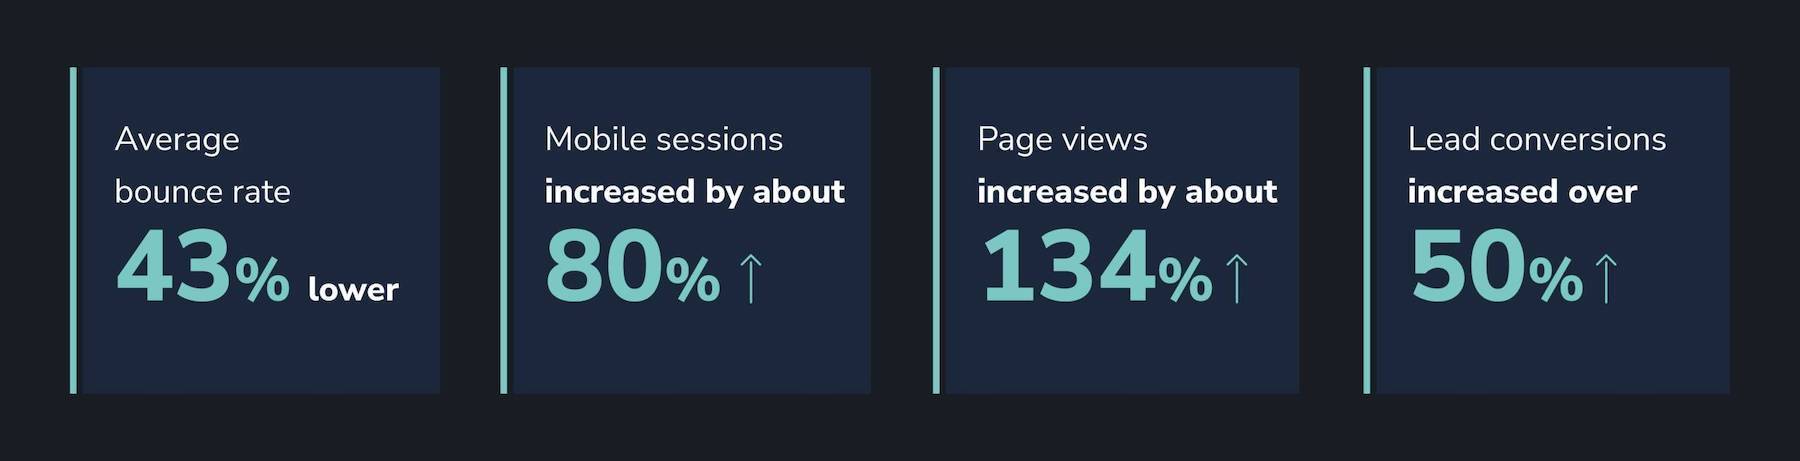 key performance indicator research results for progressive web apps